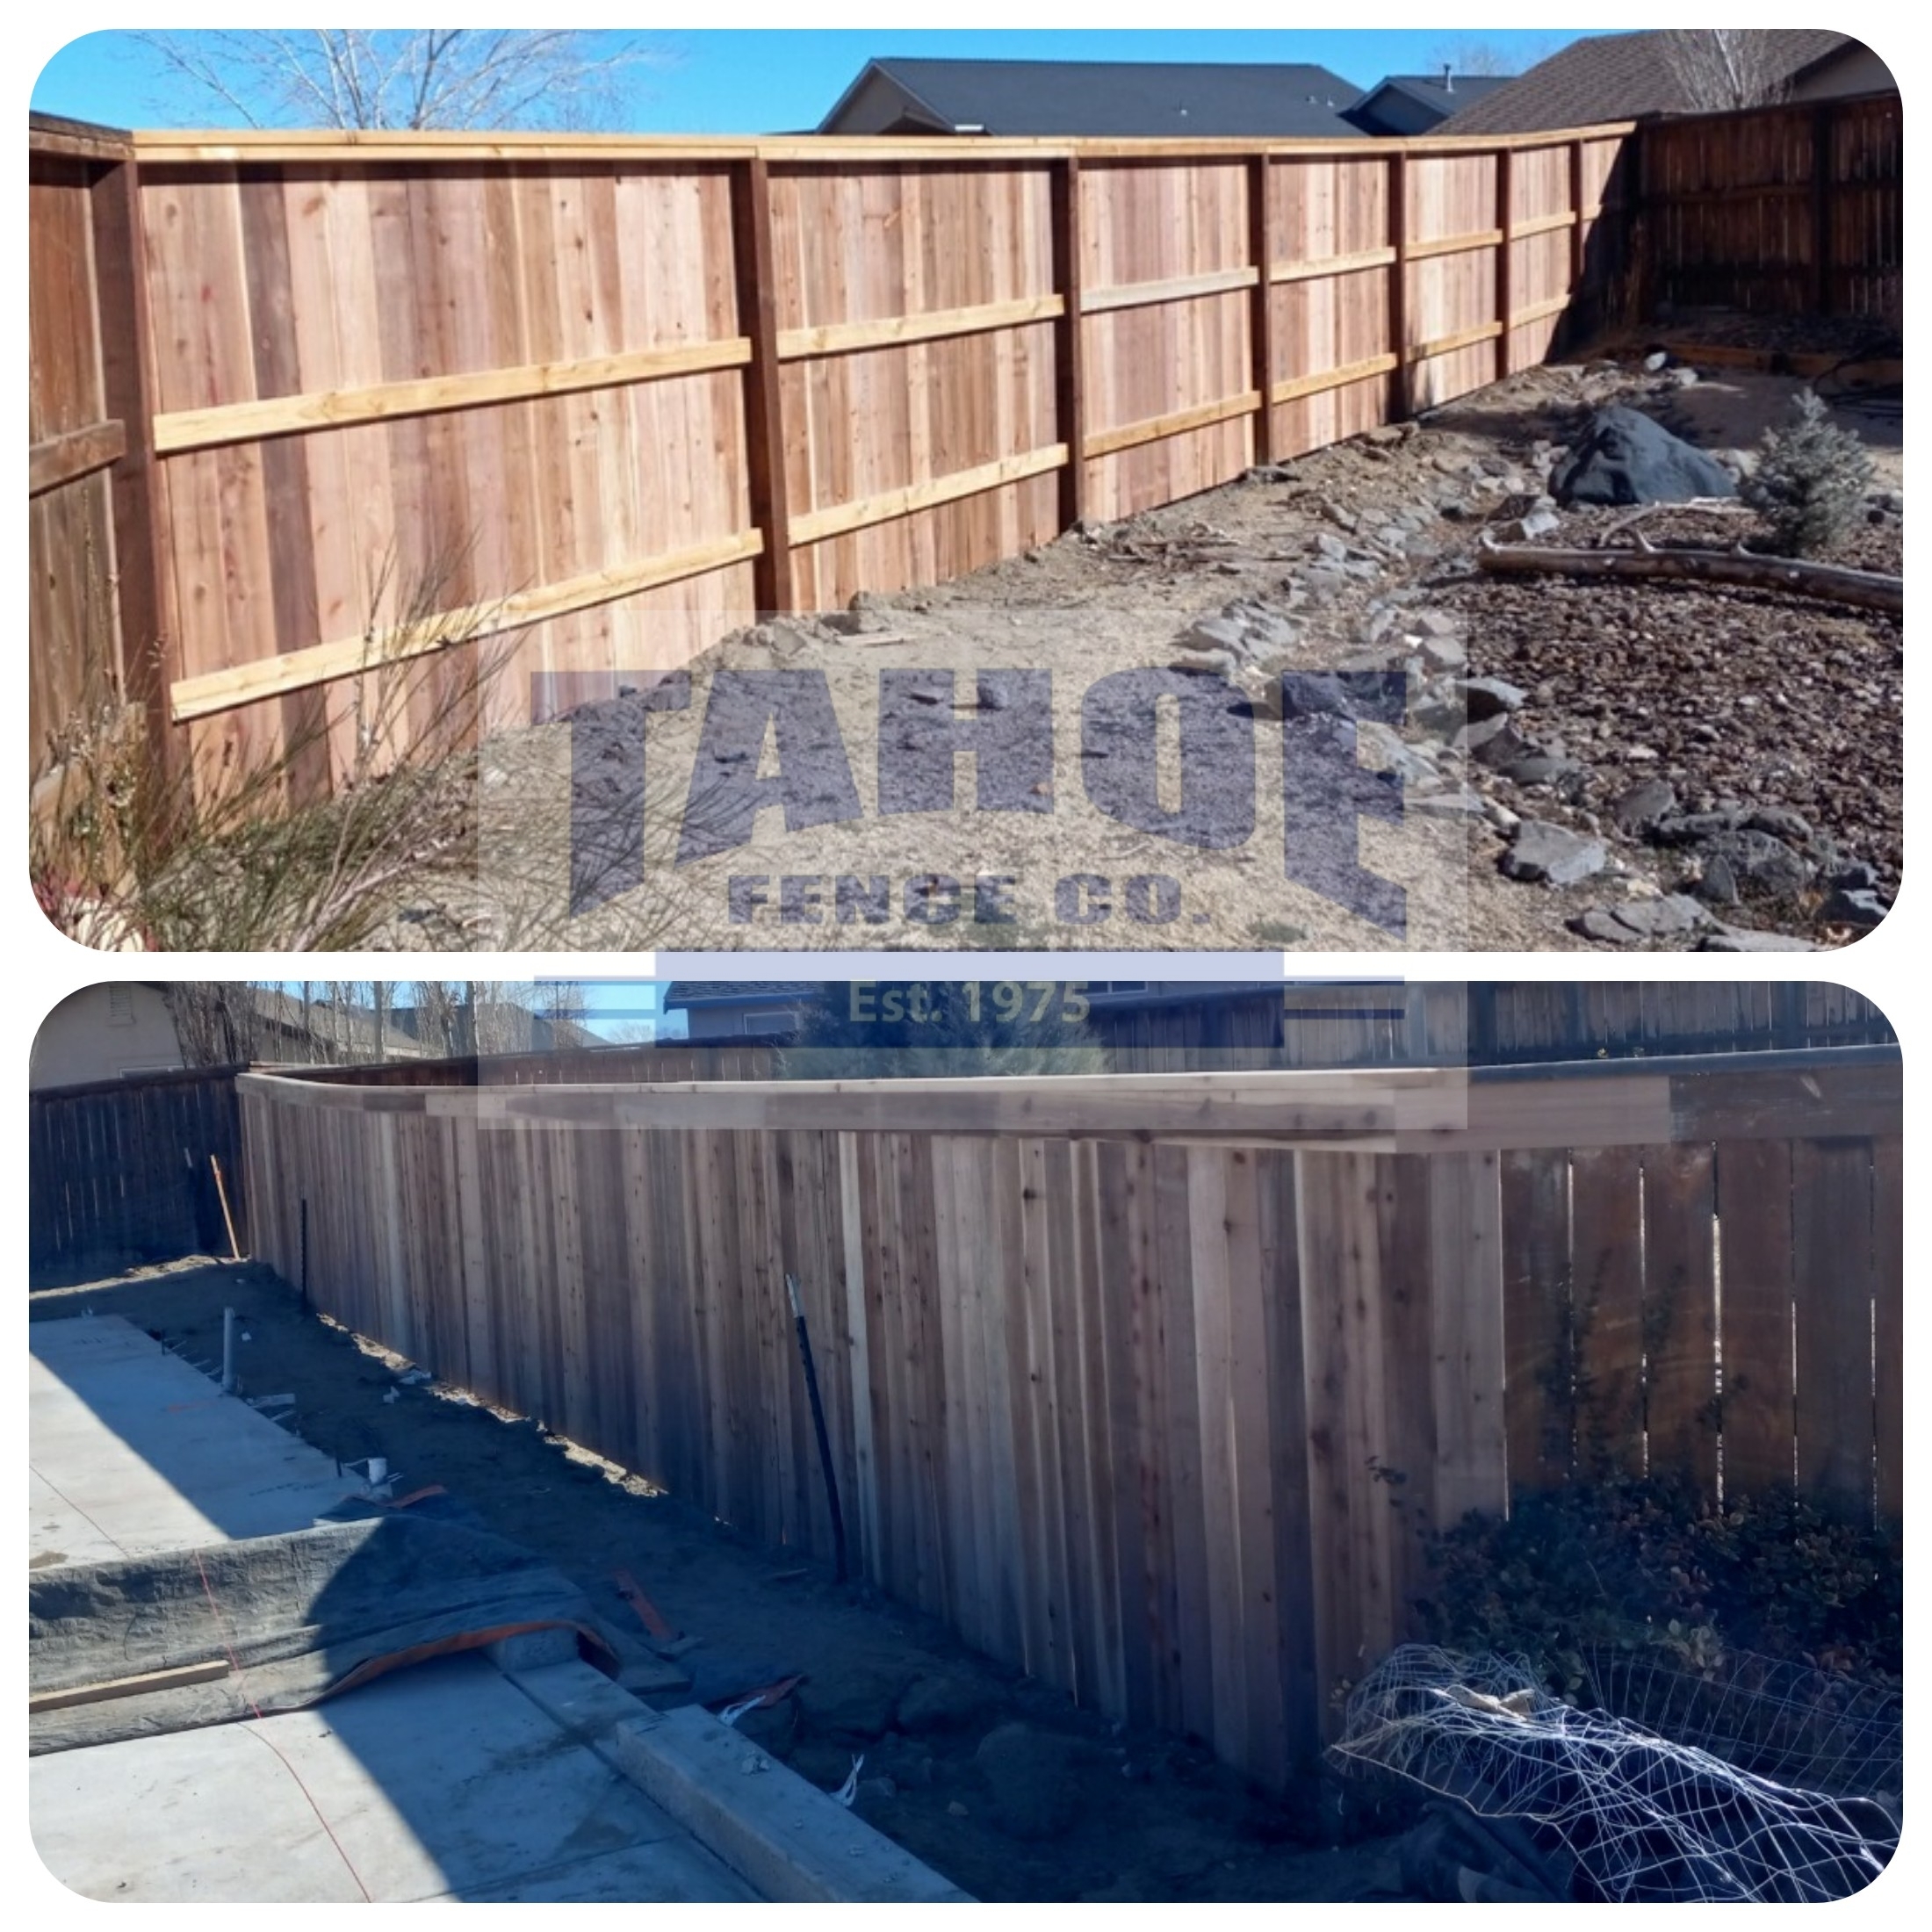 Storm damaged wood fence replacement by Tahoe Fence in Reno with 3-rail design including additional top cap and top face board.